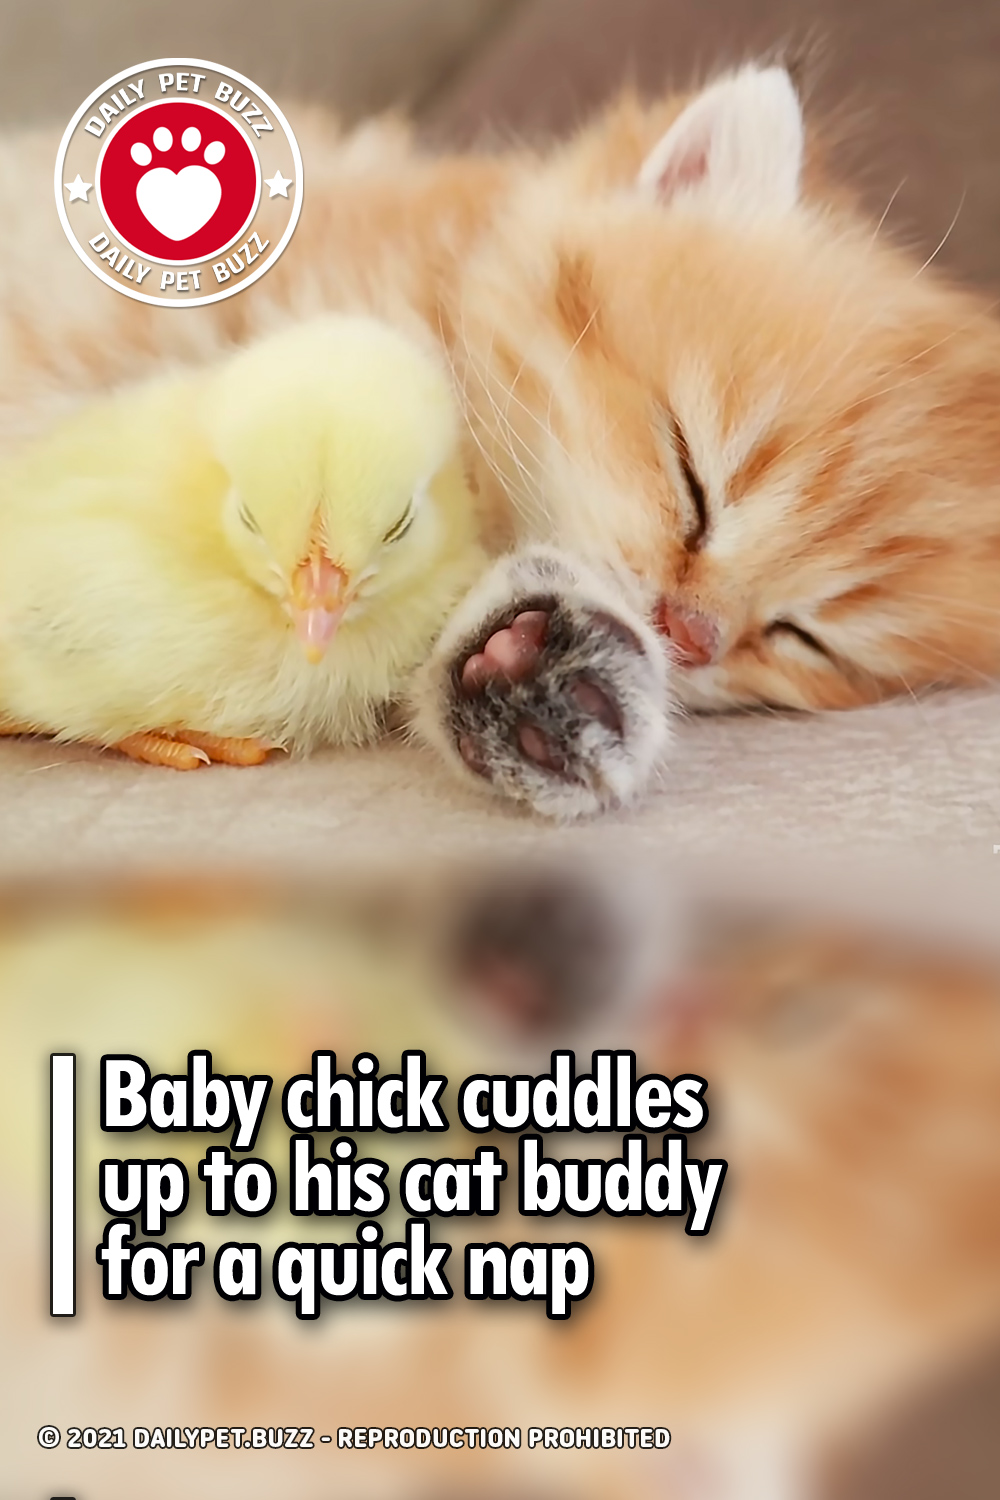 Baby chick cuddles up to his cat buddy for a quick nap